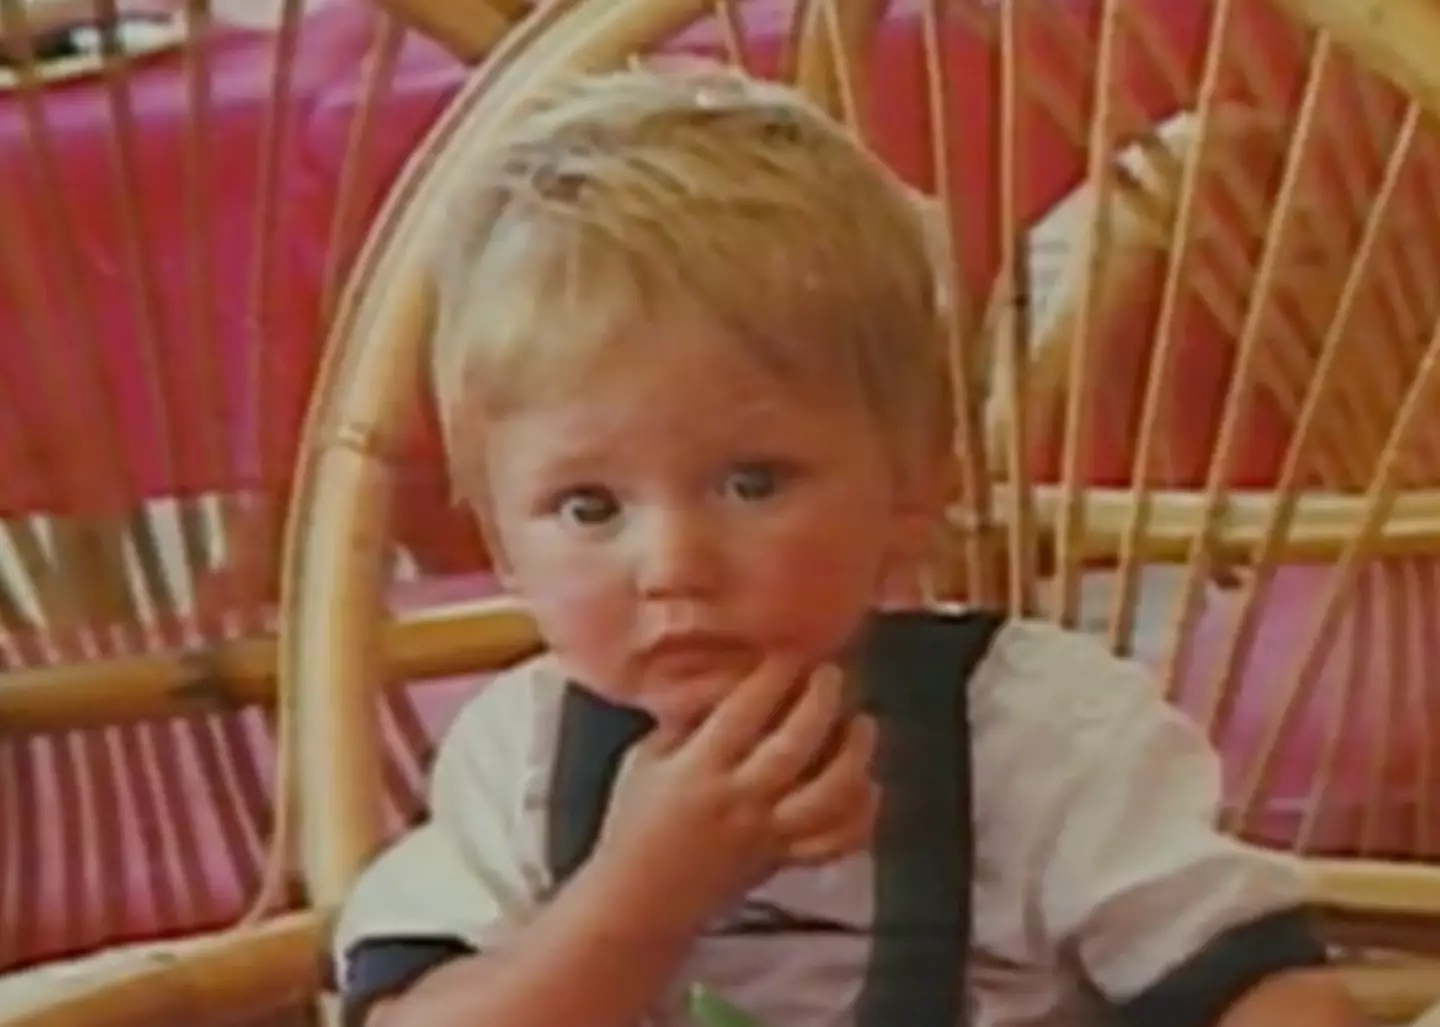 Ben Needham was 21-months-old when he disappeared.